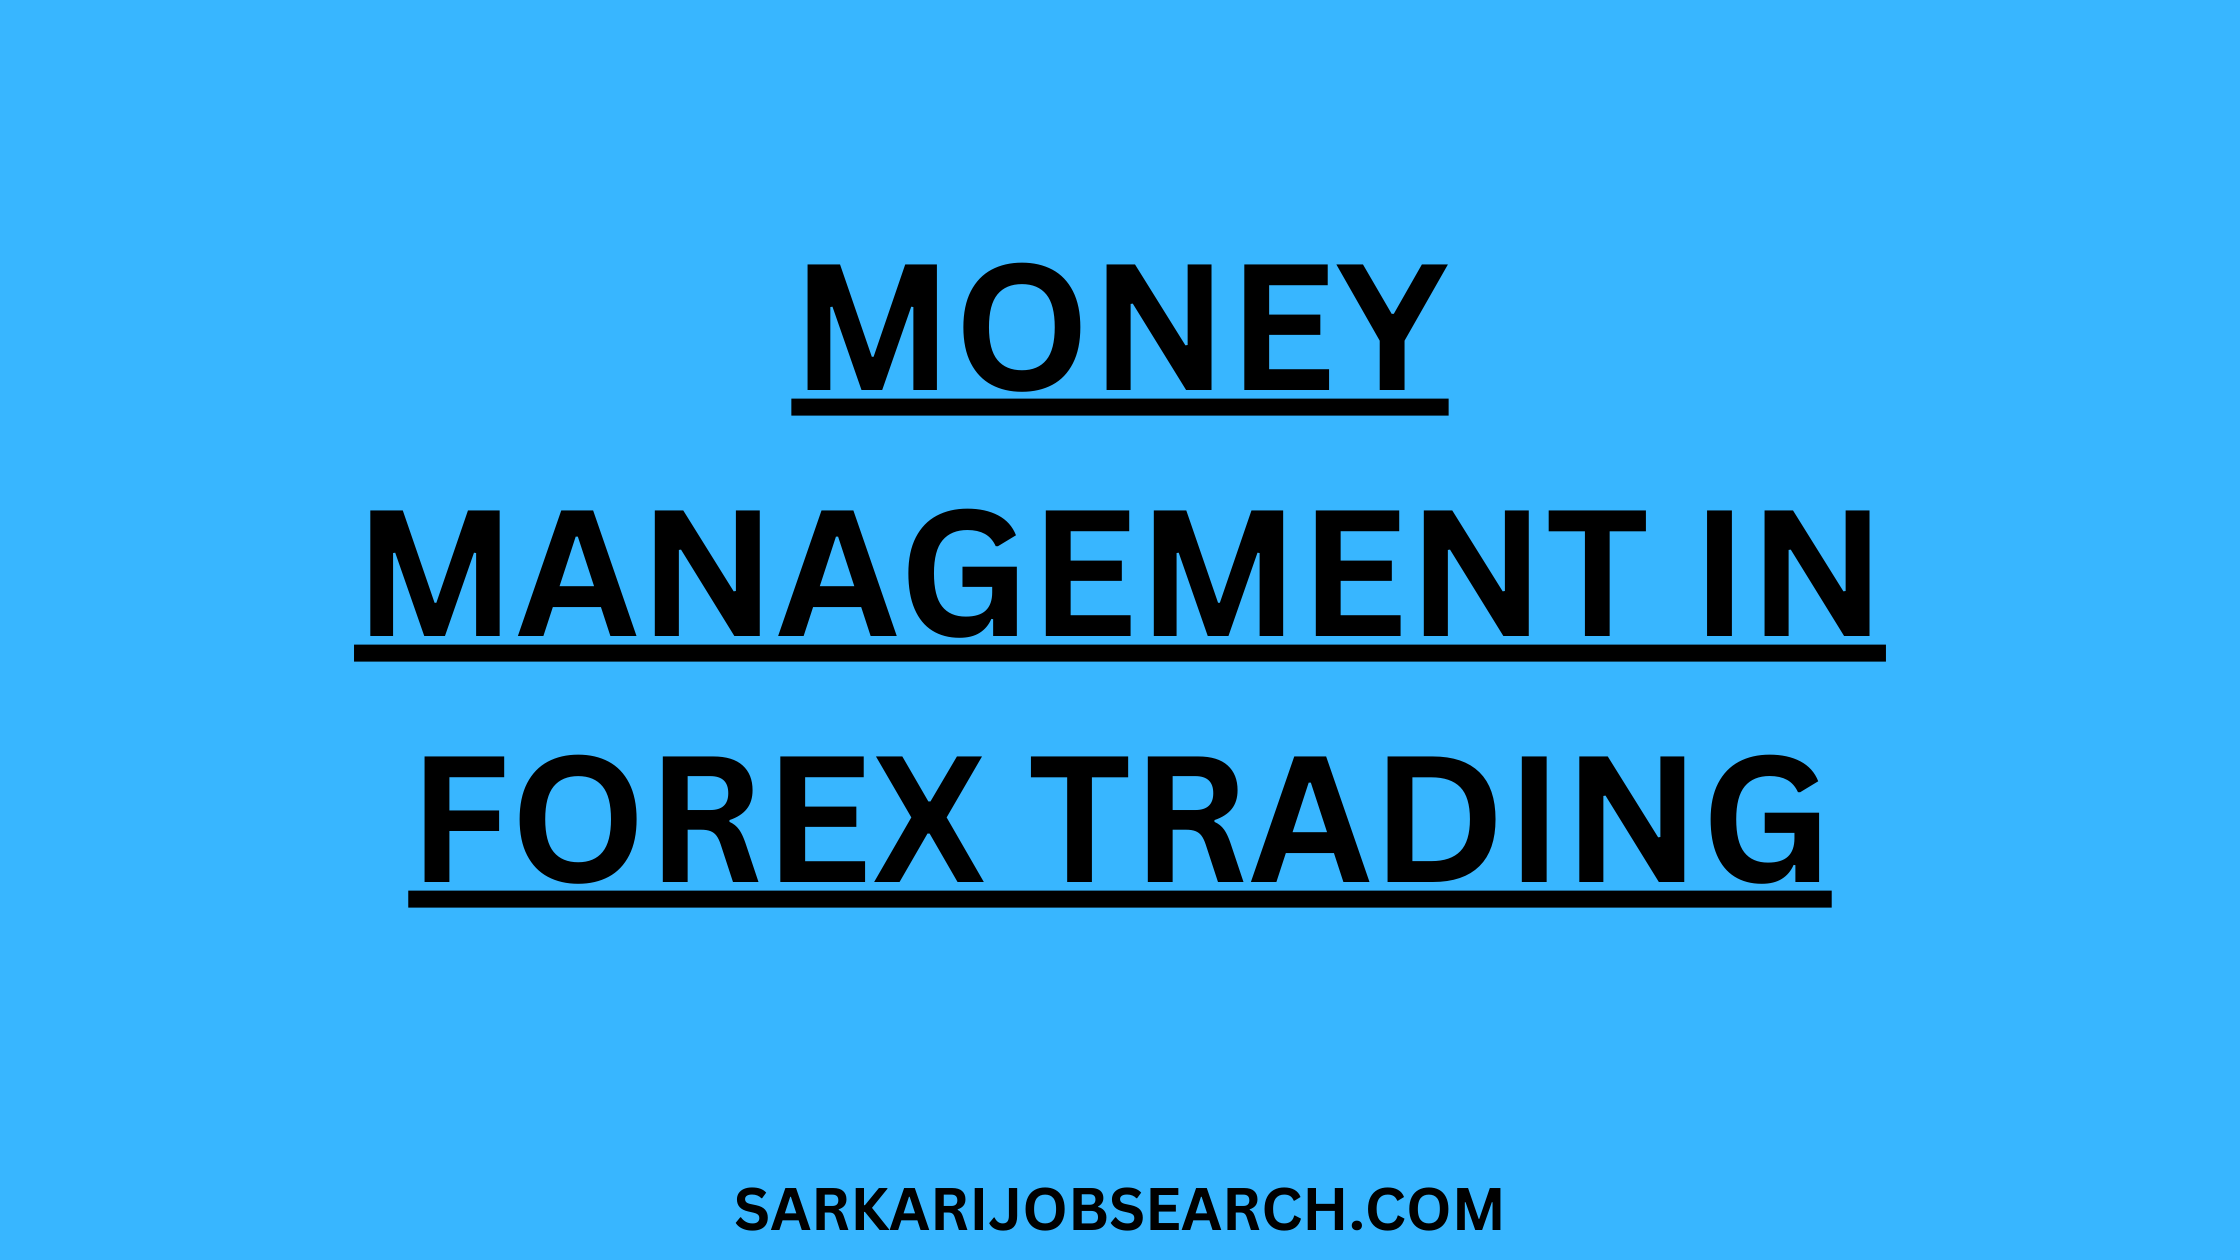 Money Management in Forex Trading | The Secret to Profitable Trading